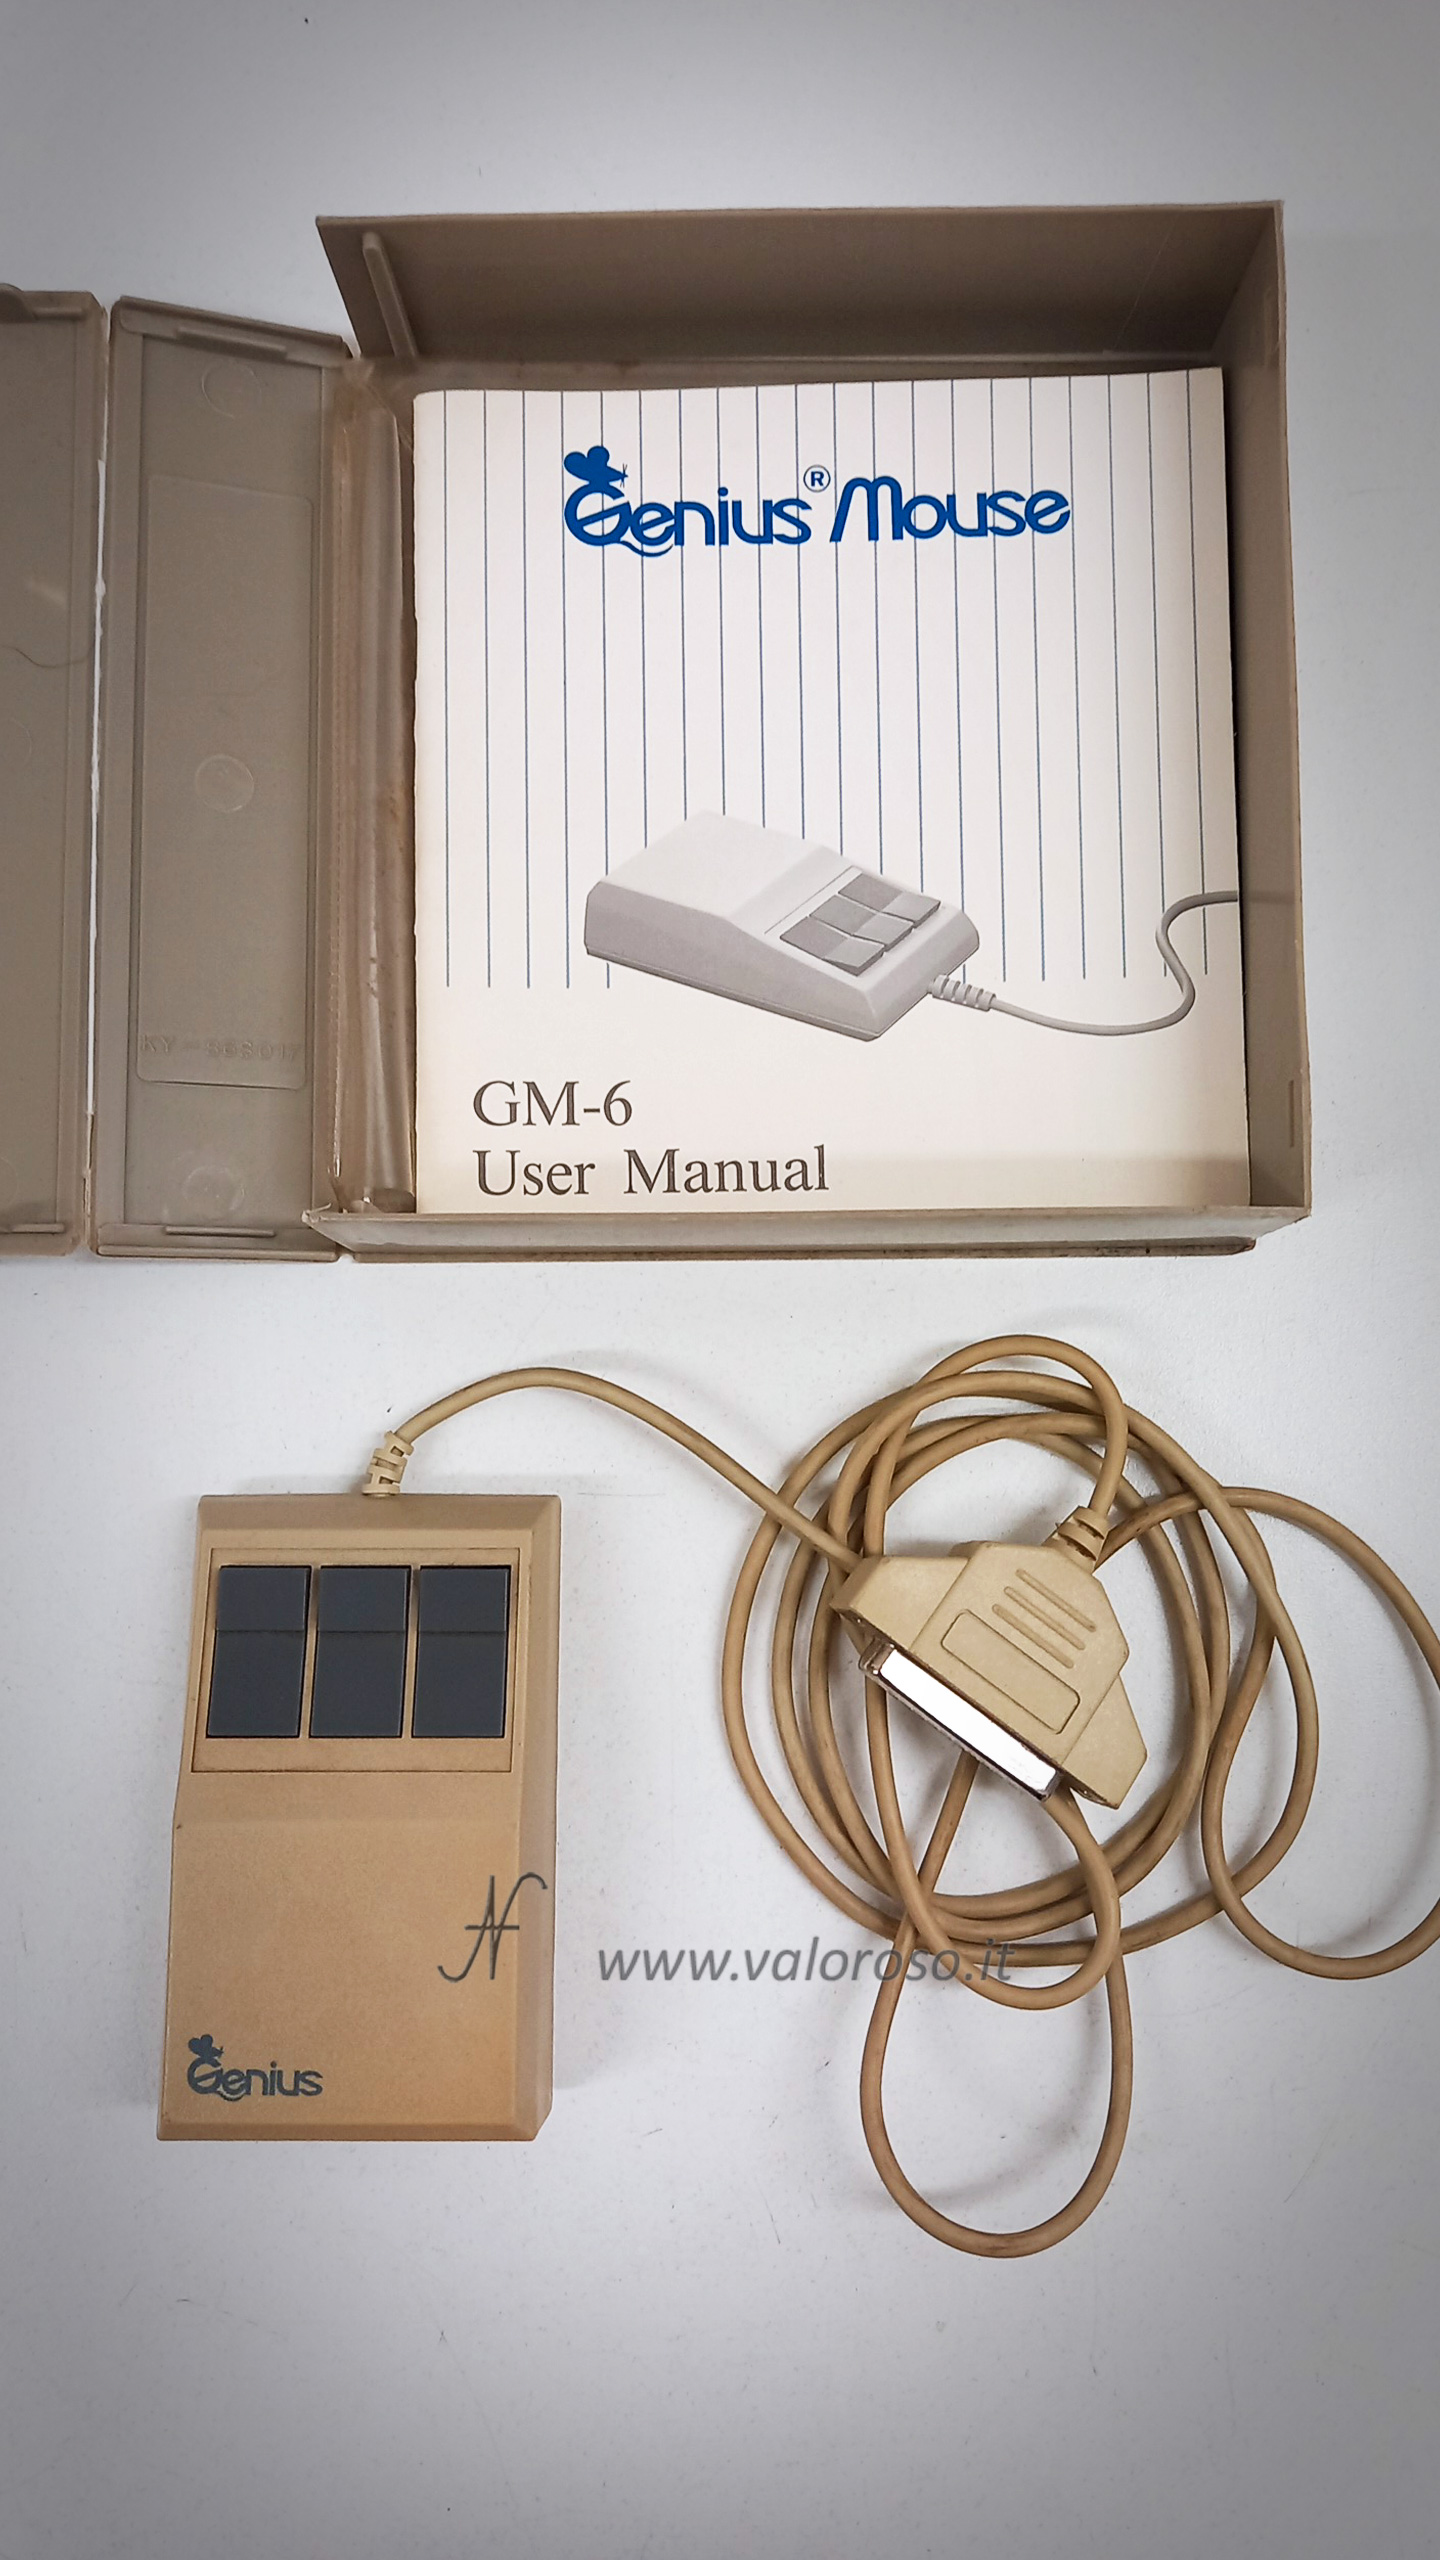 Genius GM-6 GM6 vintage mouse serial 3 buttons DB25 box, scatola, manuale, GM-6 user manual